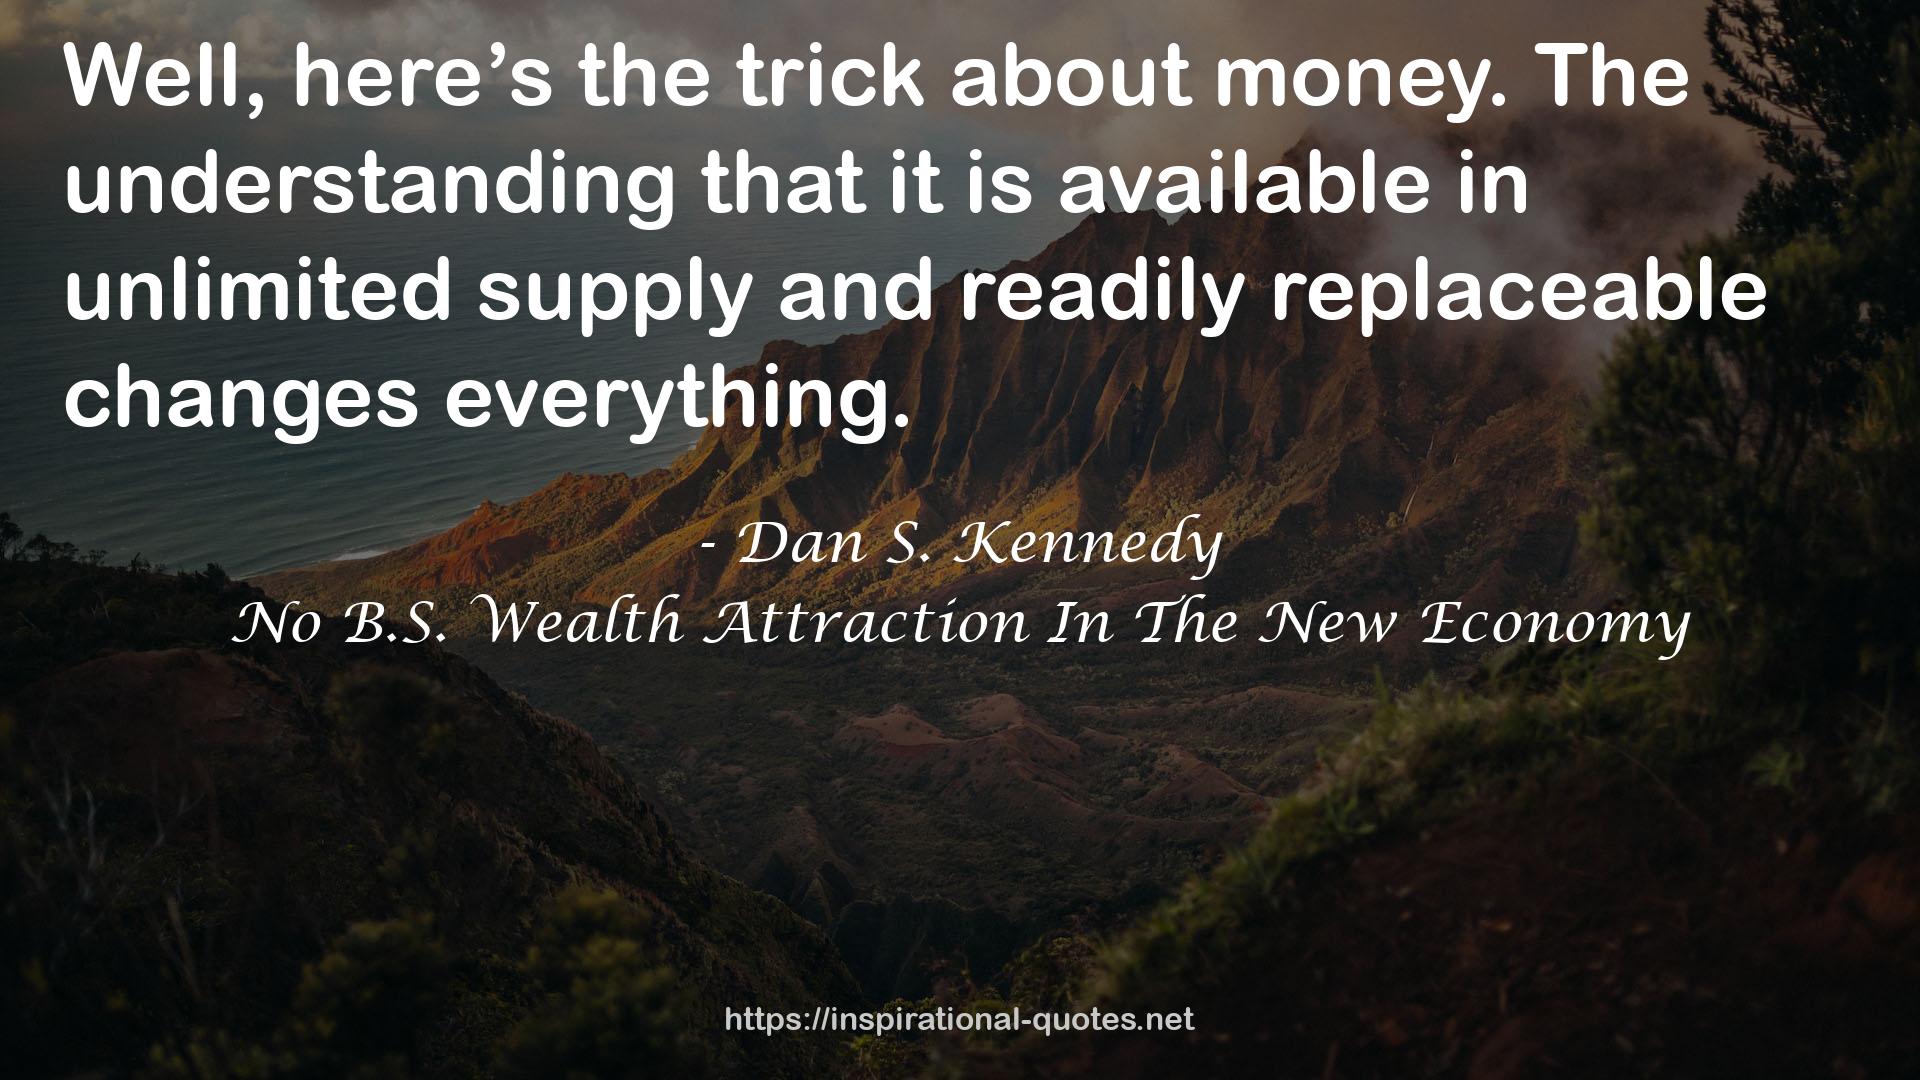 No B.S. Wealth Attraction In The New Economy QUOTES